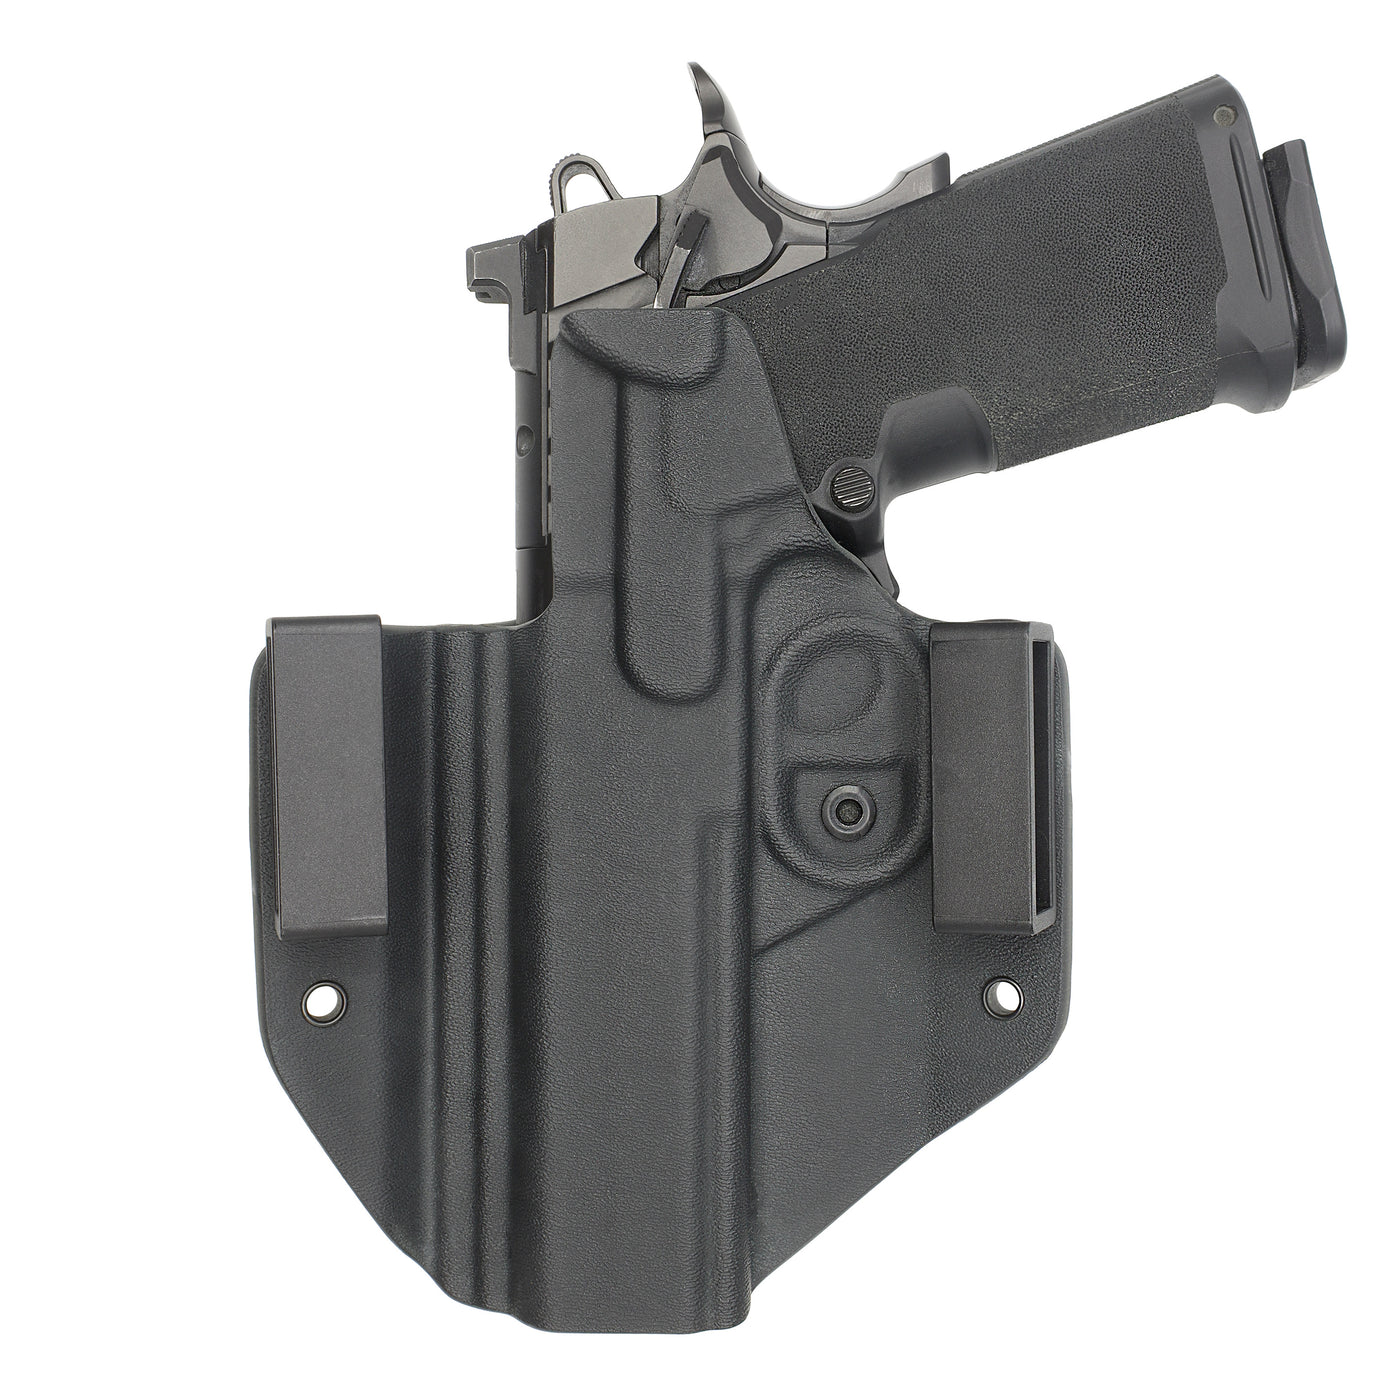 C&G Holsters custom OWB Springfield 1911 DS Prodigy holstered back view